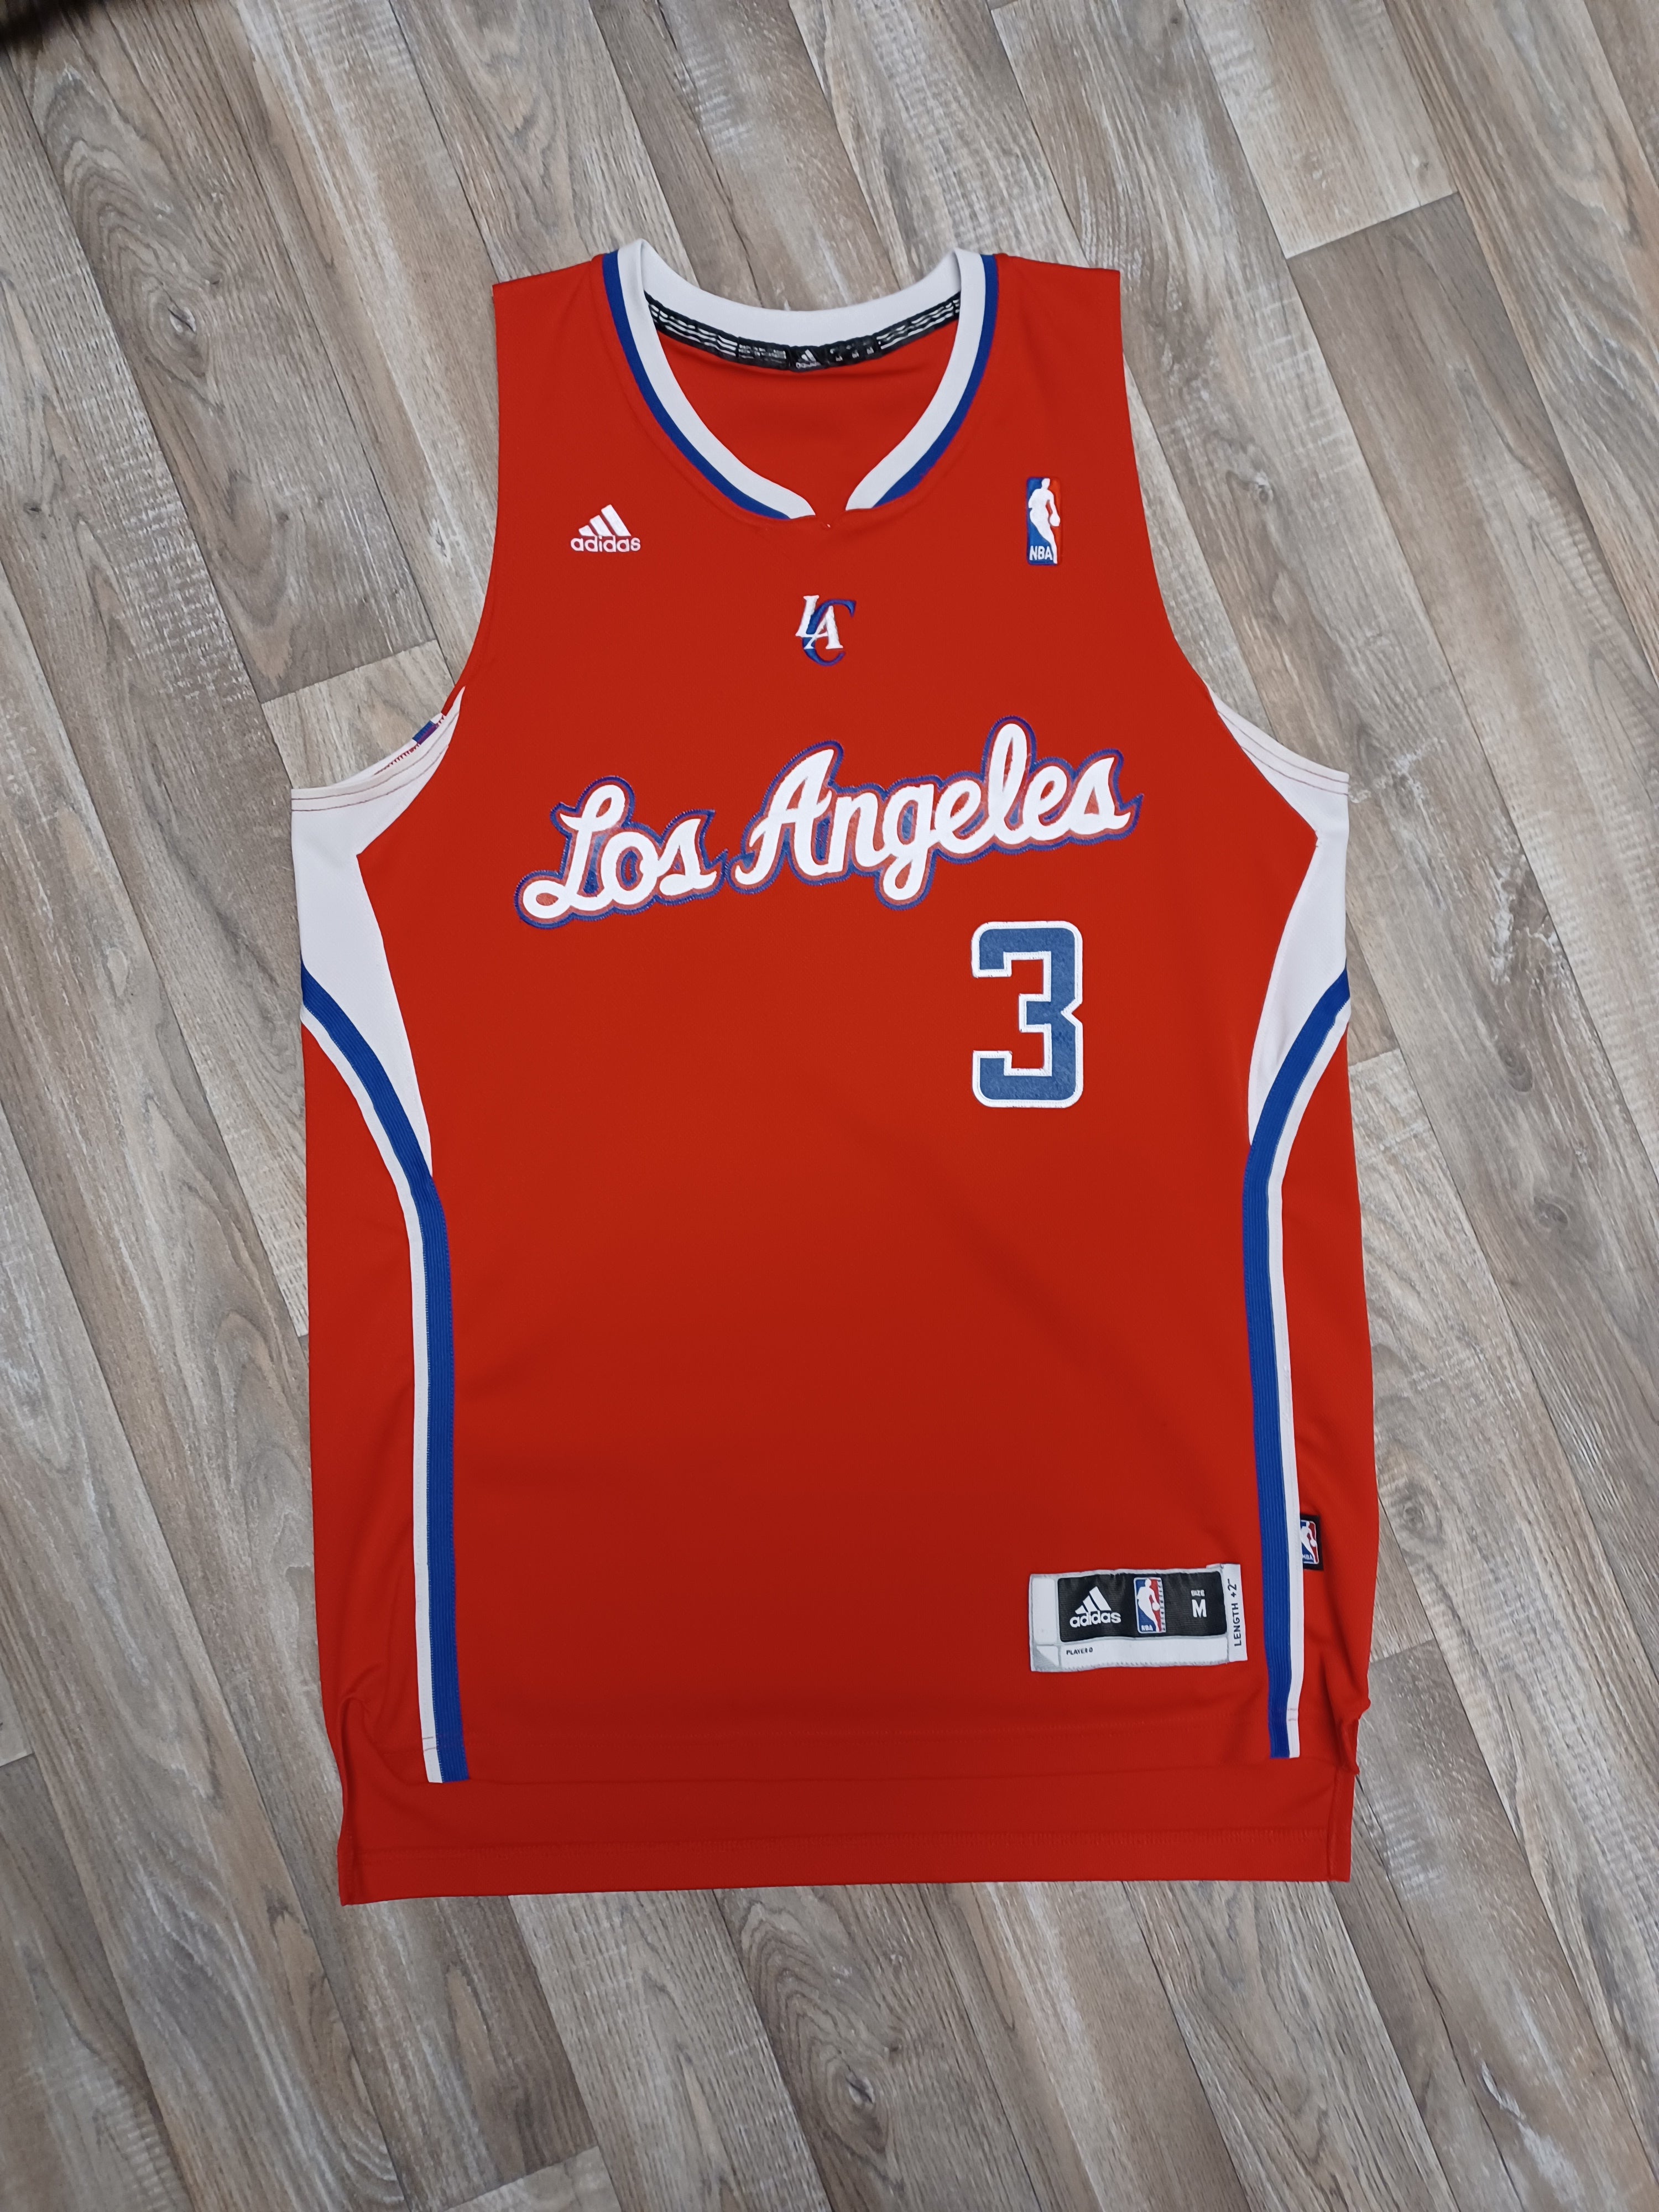 🏀 Chris Paul Los Angeles Clippers Jersey Size Medium – The Throwback Store  🏀